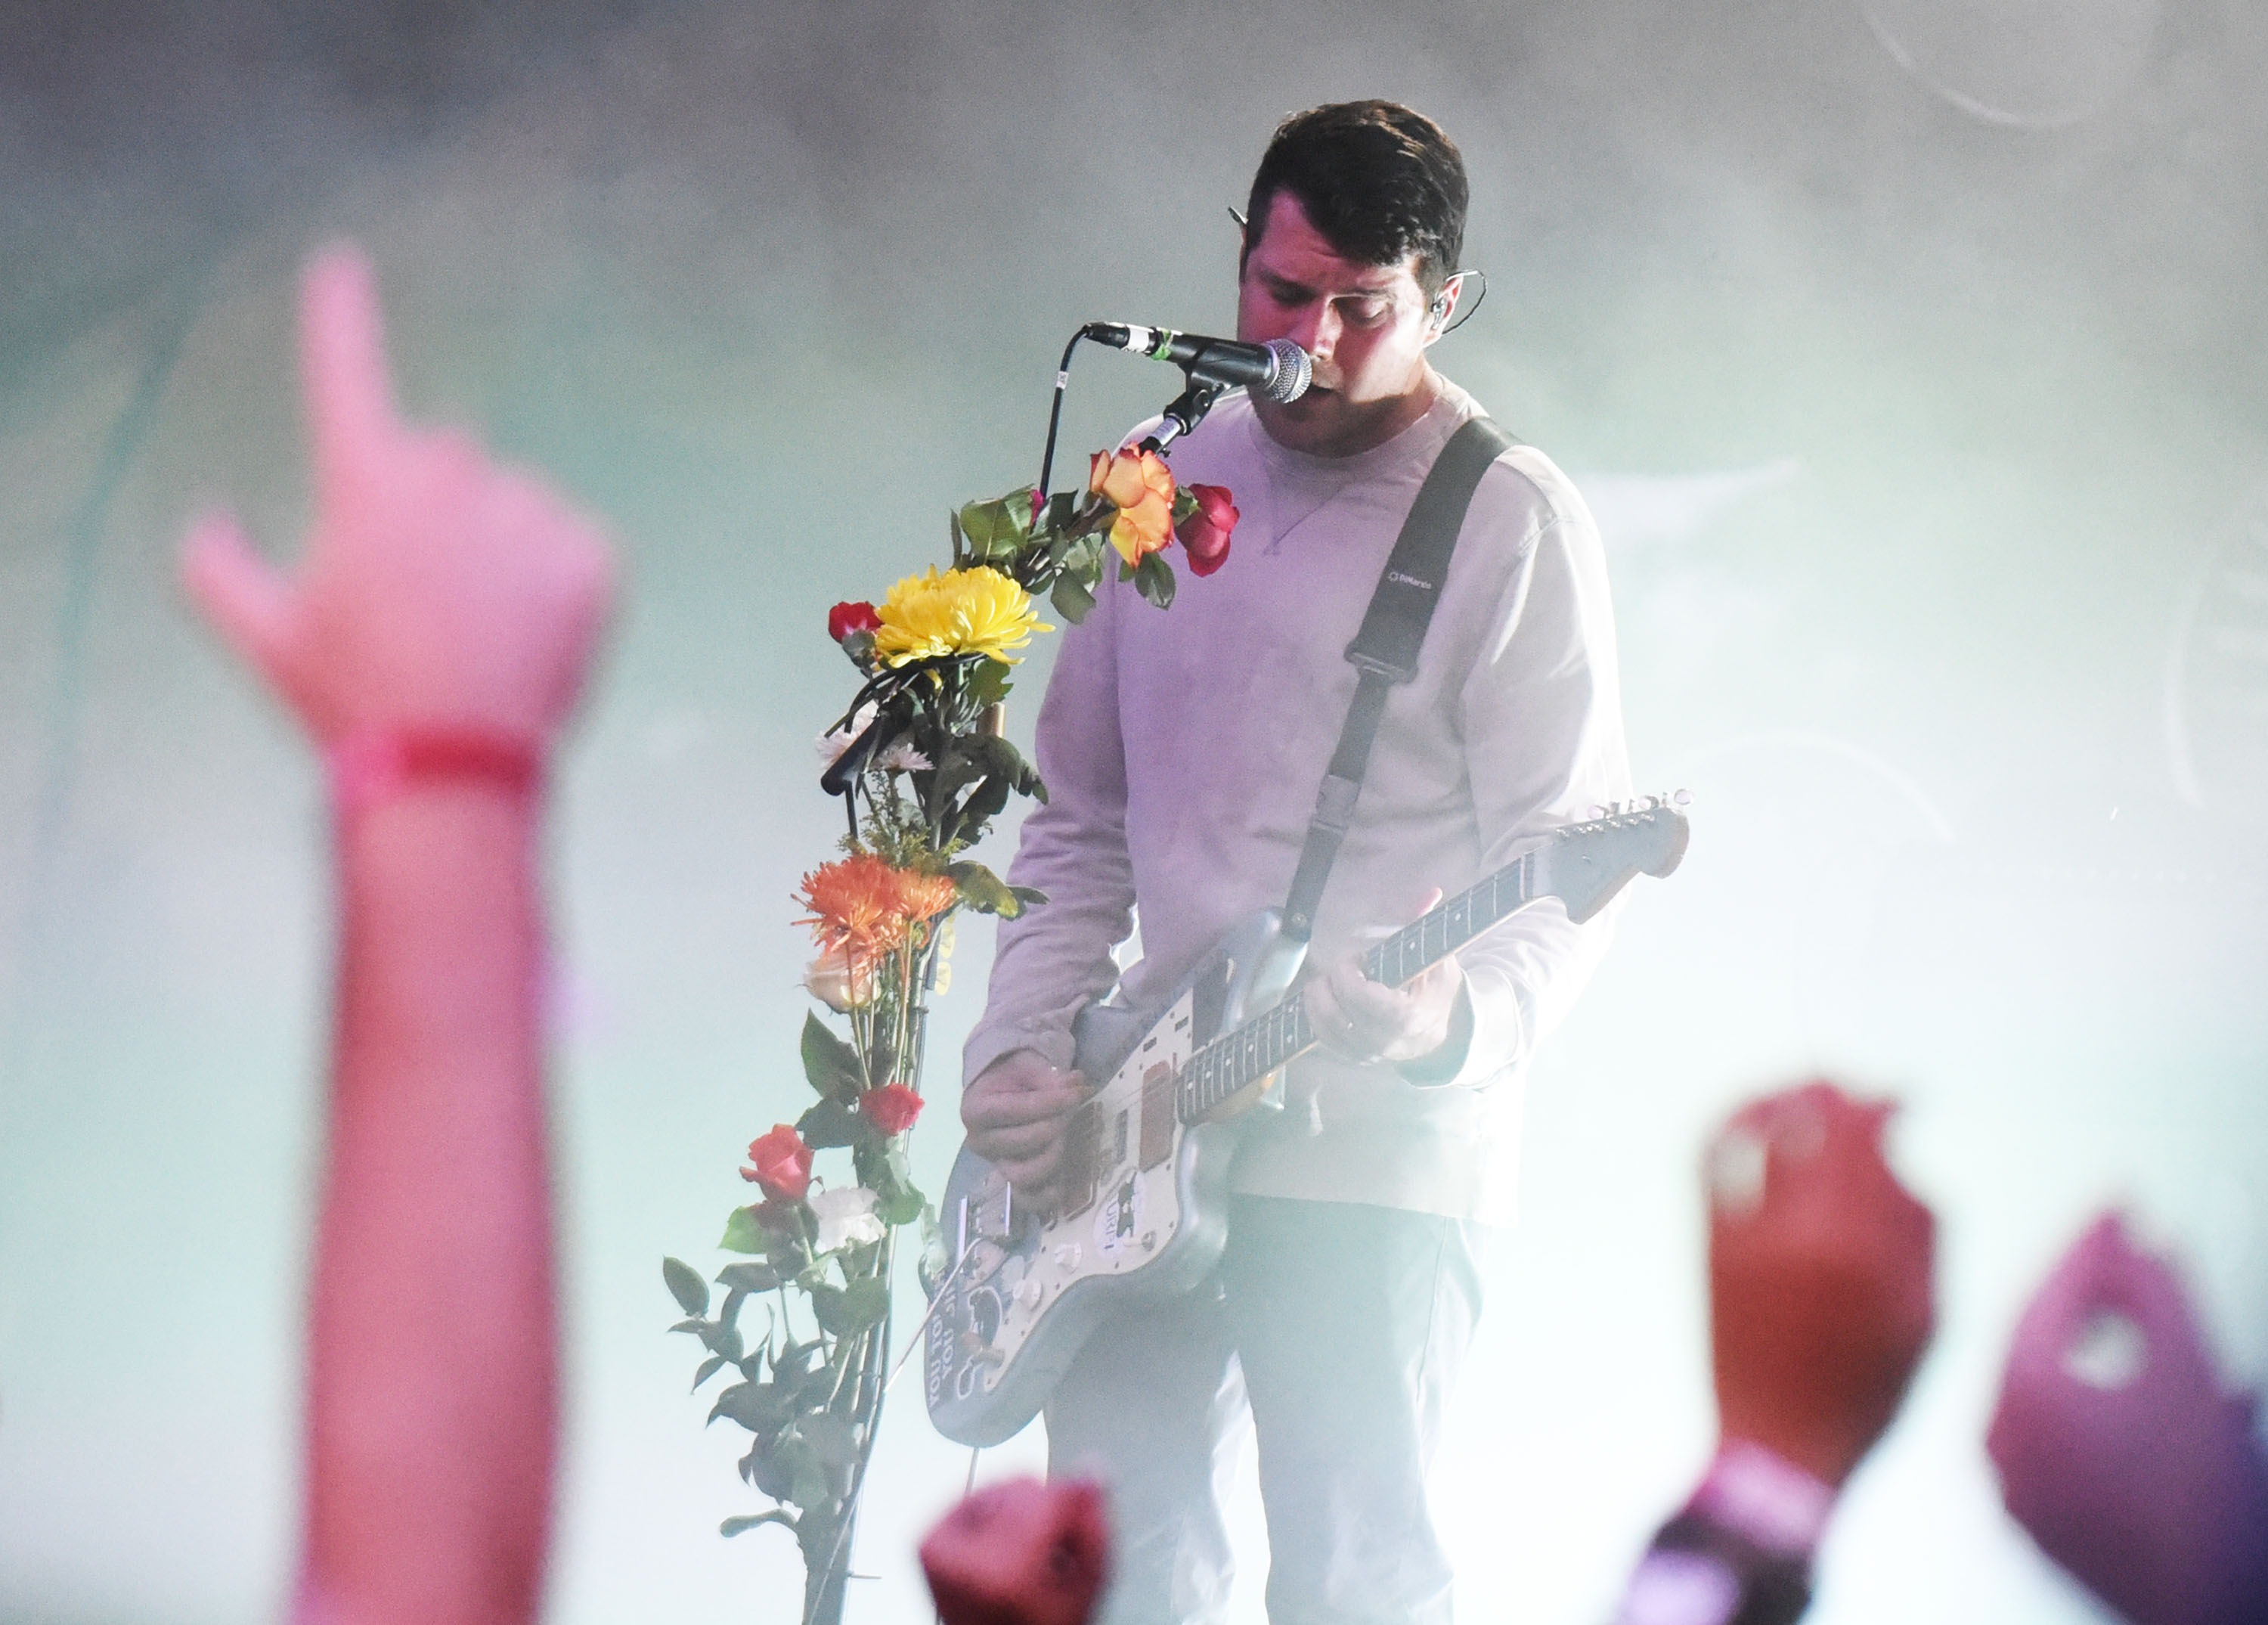 Brand New's Jesse Lacey Releases Statement Regarding Allegations - All  Things Loud